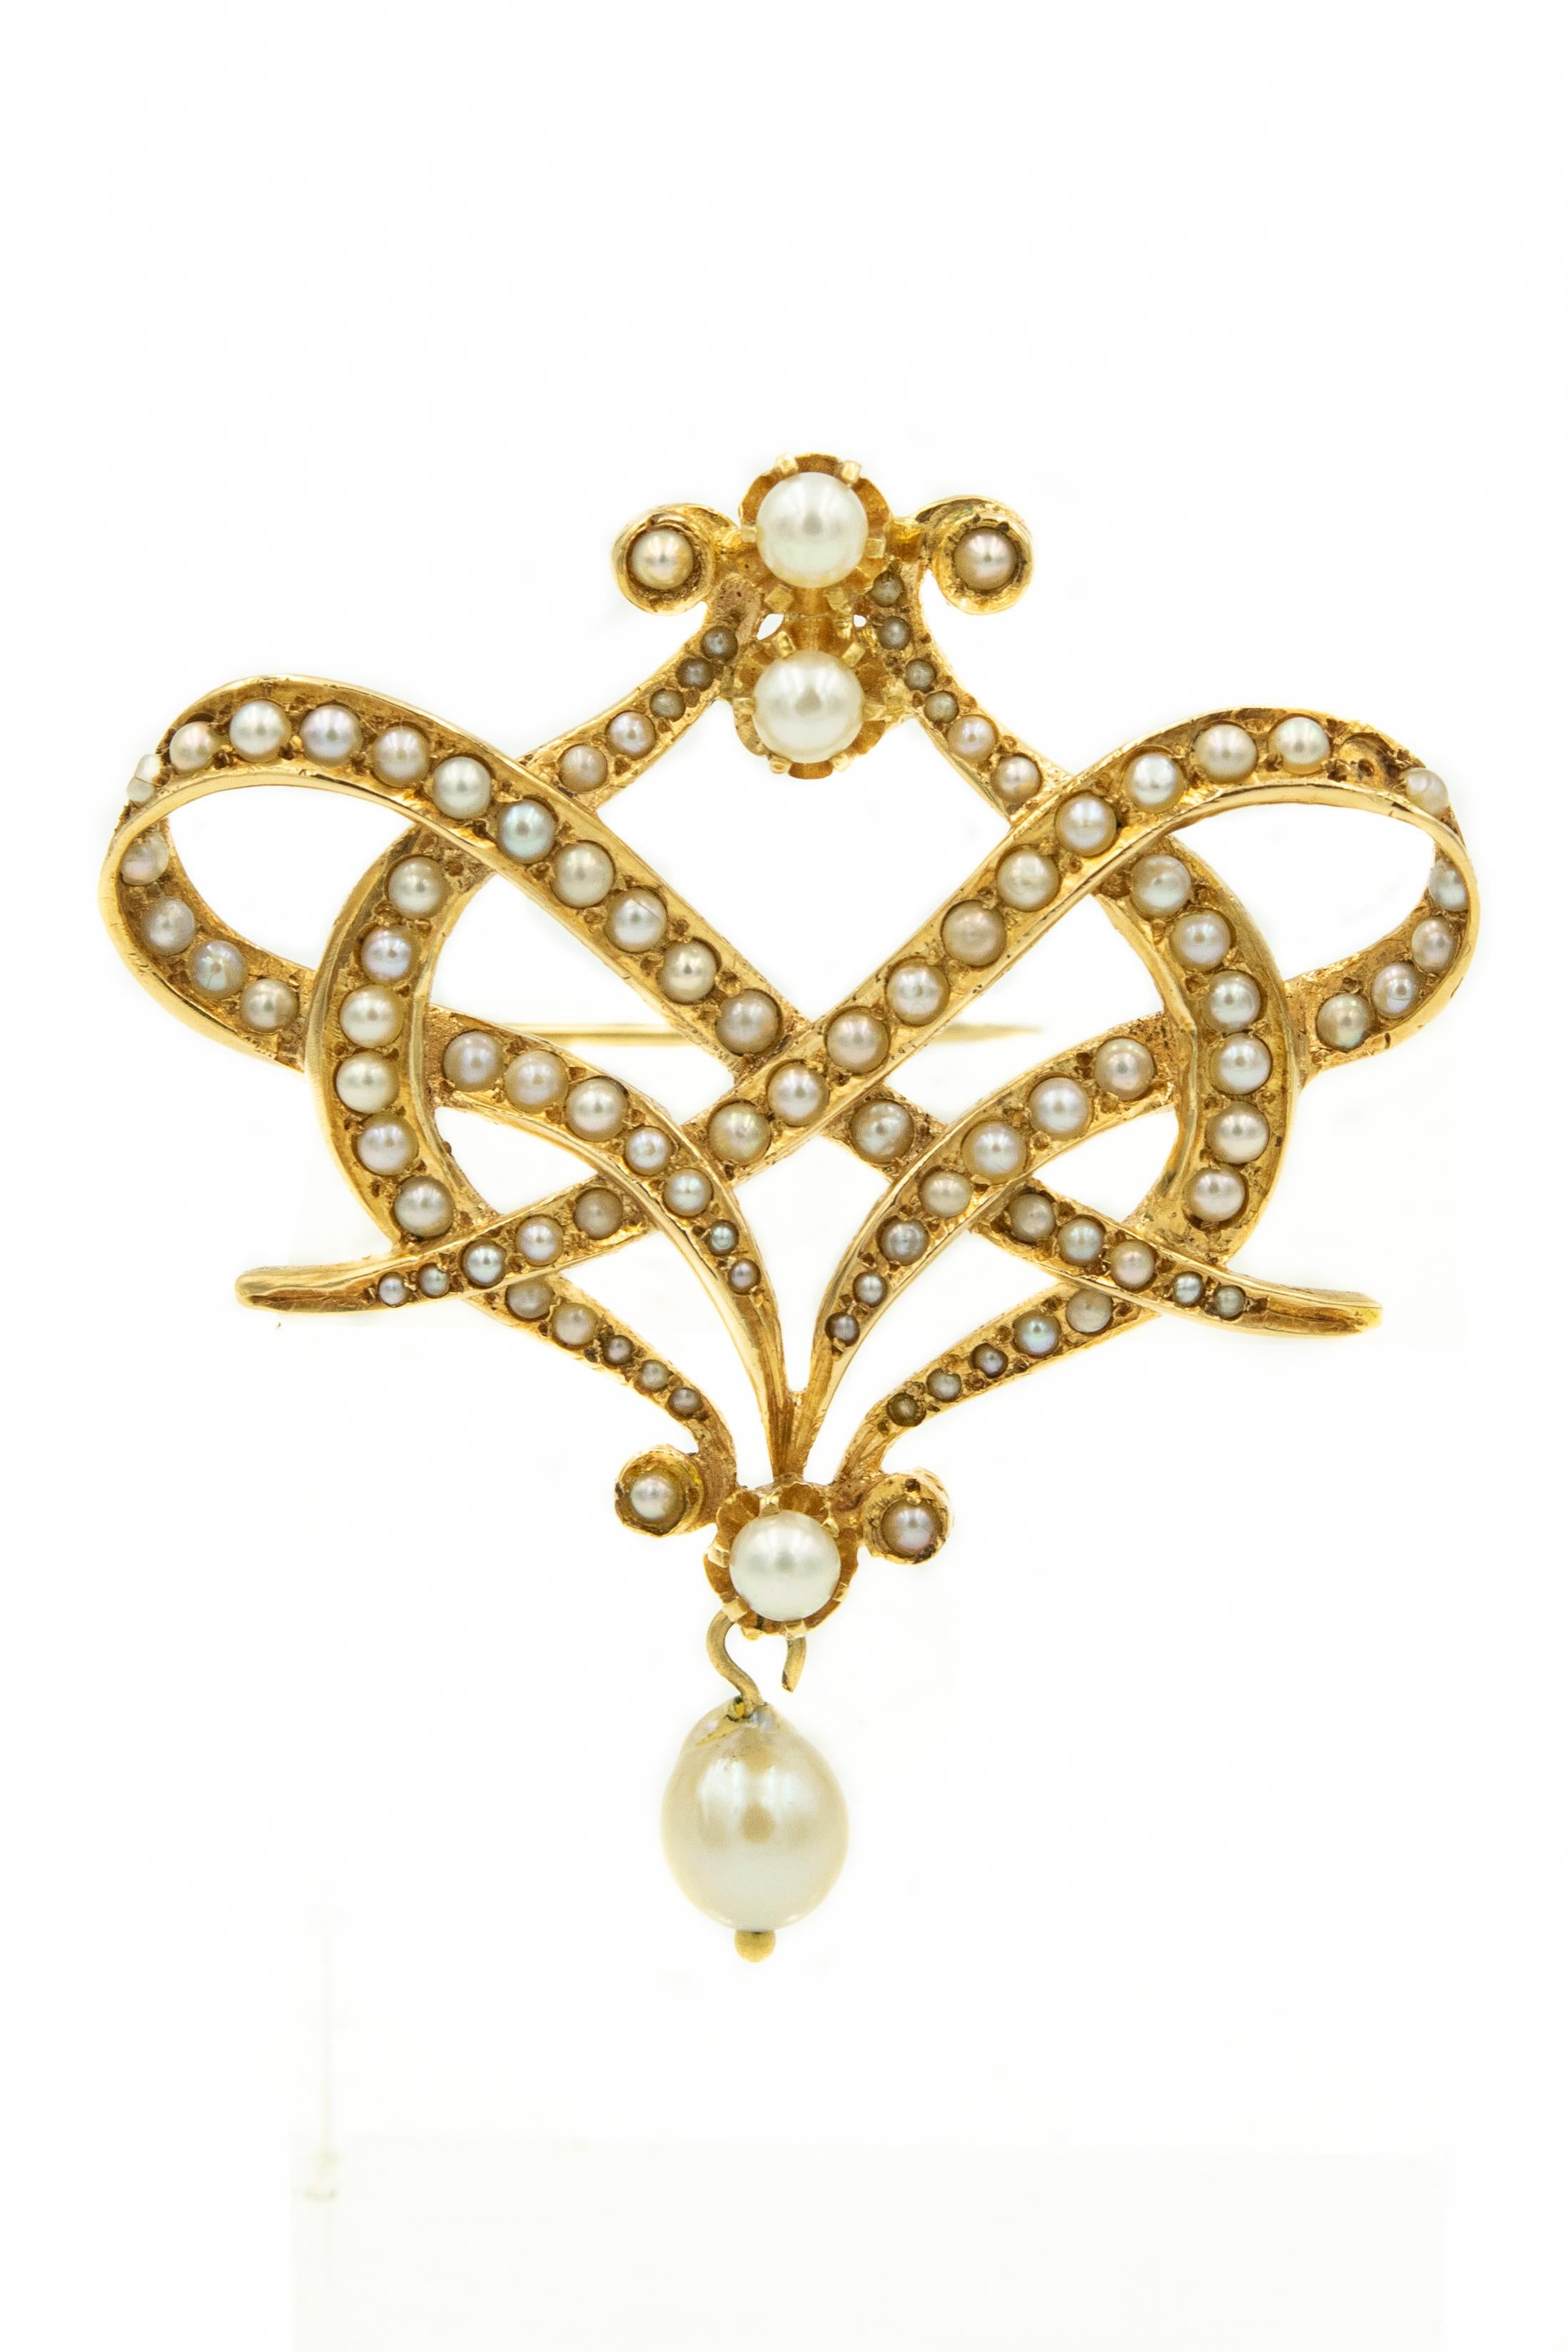 1970s Victorian style seed pearl garland ribbon design brooch with cultured pearl drop.  The back also has pendant double loop for a necklace to go through.

Matching 14k yellow gold earrings have cultured pearls dropping from seed pearl shields. 